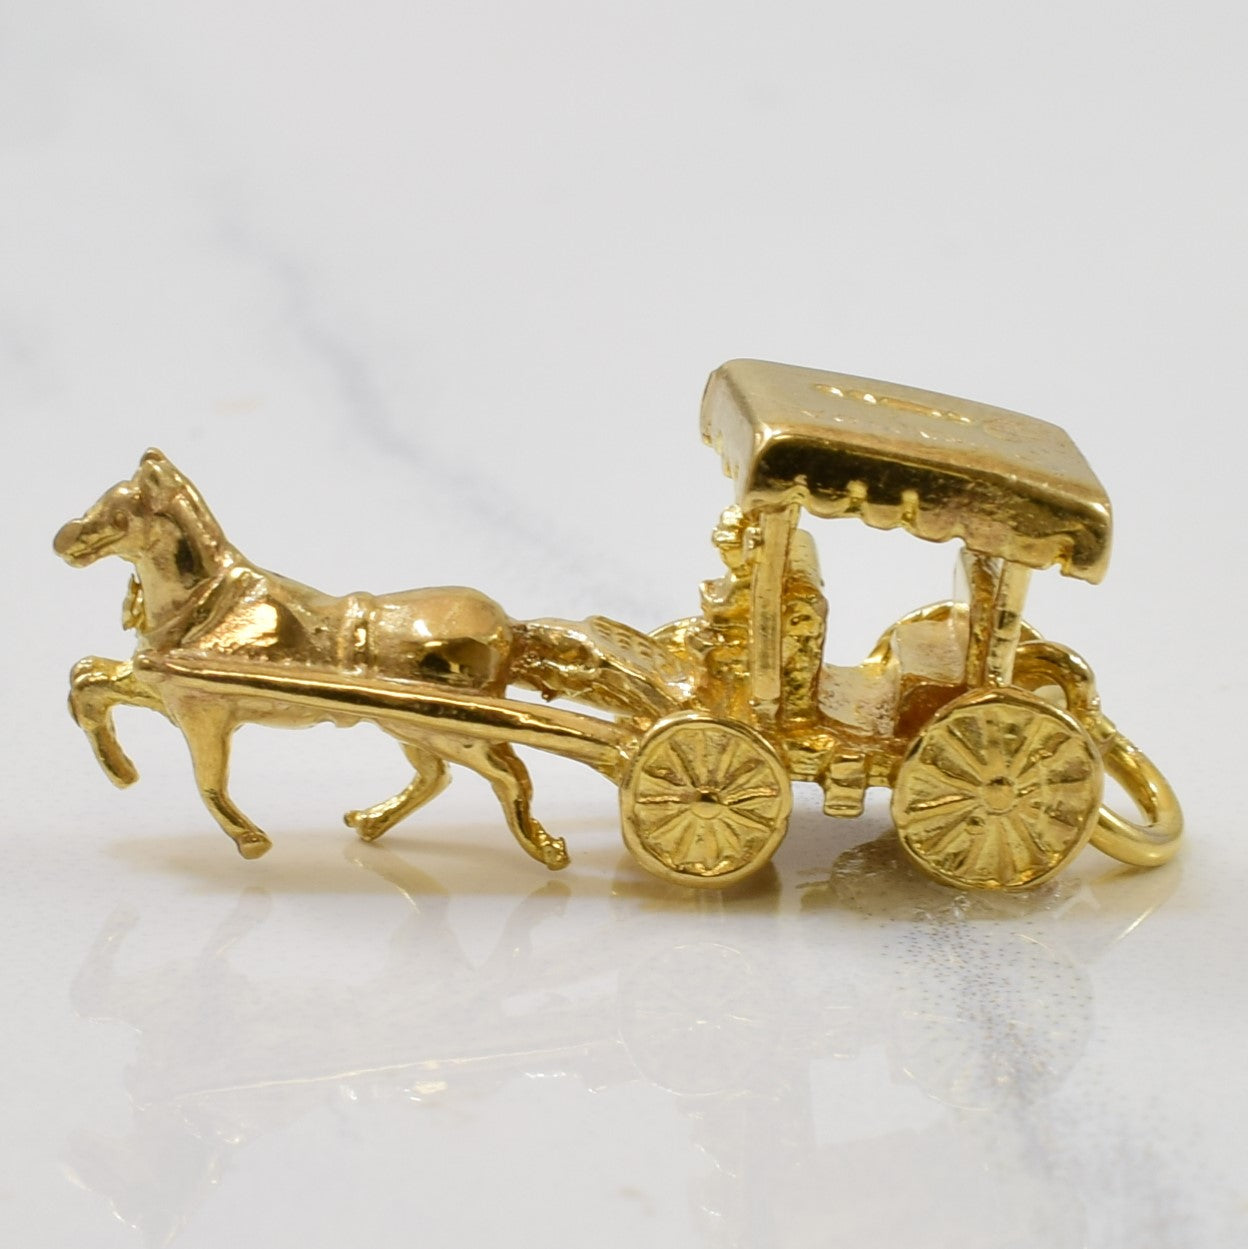 Horse Drawn Carriage Pendant |